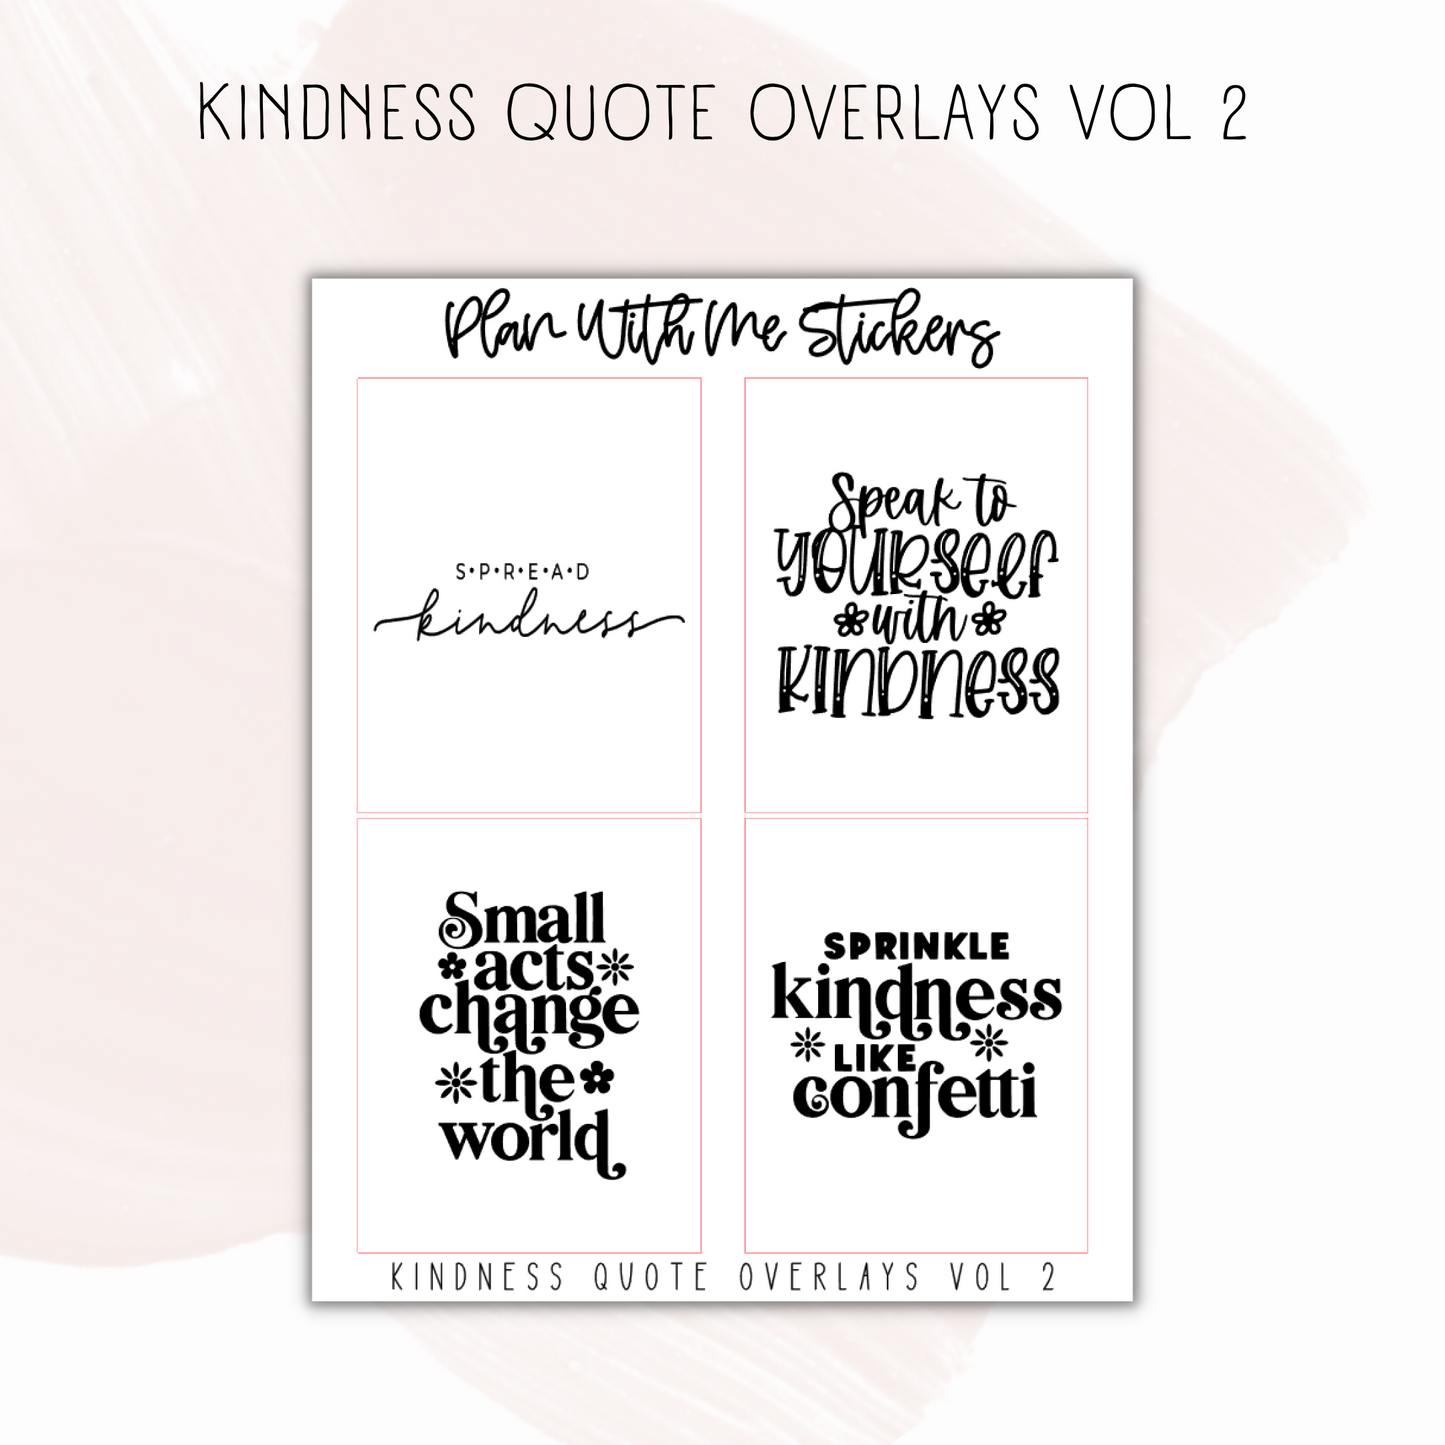 Kindness Quote Overlays Vol 2